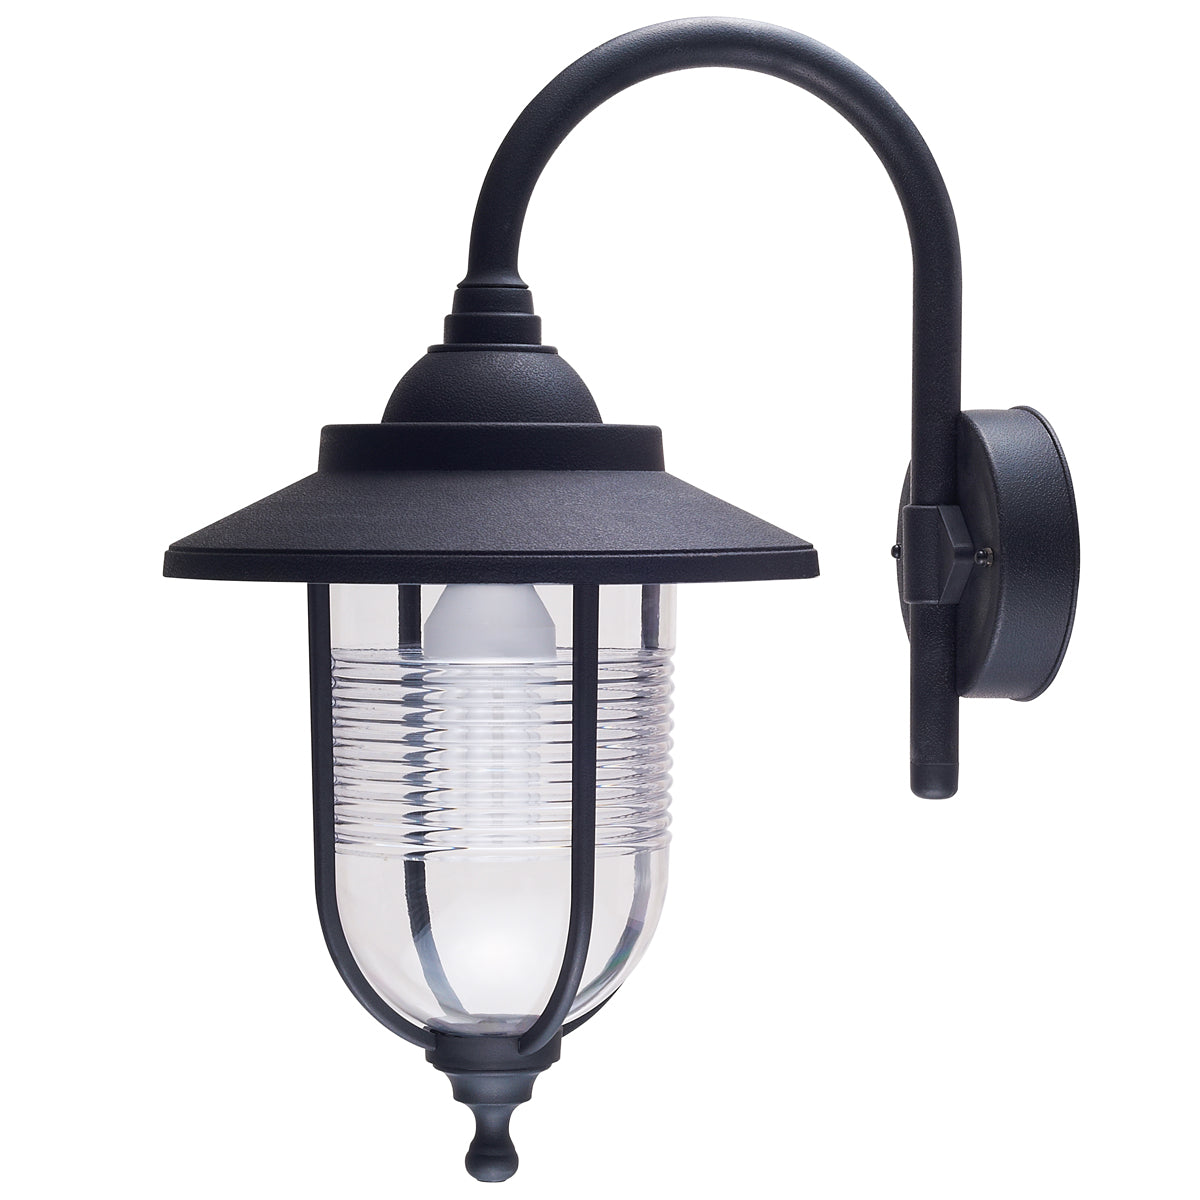 The Jemima black fisherman hooked outdoor wall lantern light is constructed of polycarbonate and features an attractive design inspired by traditional lighting styles. This lantern wall light is a great choice for illuminating doorways and porches, creating a warm and inviting look and a safe environment. With an IP44 safety rating, the Jemima garden wall light is suitable for mounting on outdoor walls.